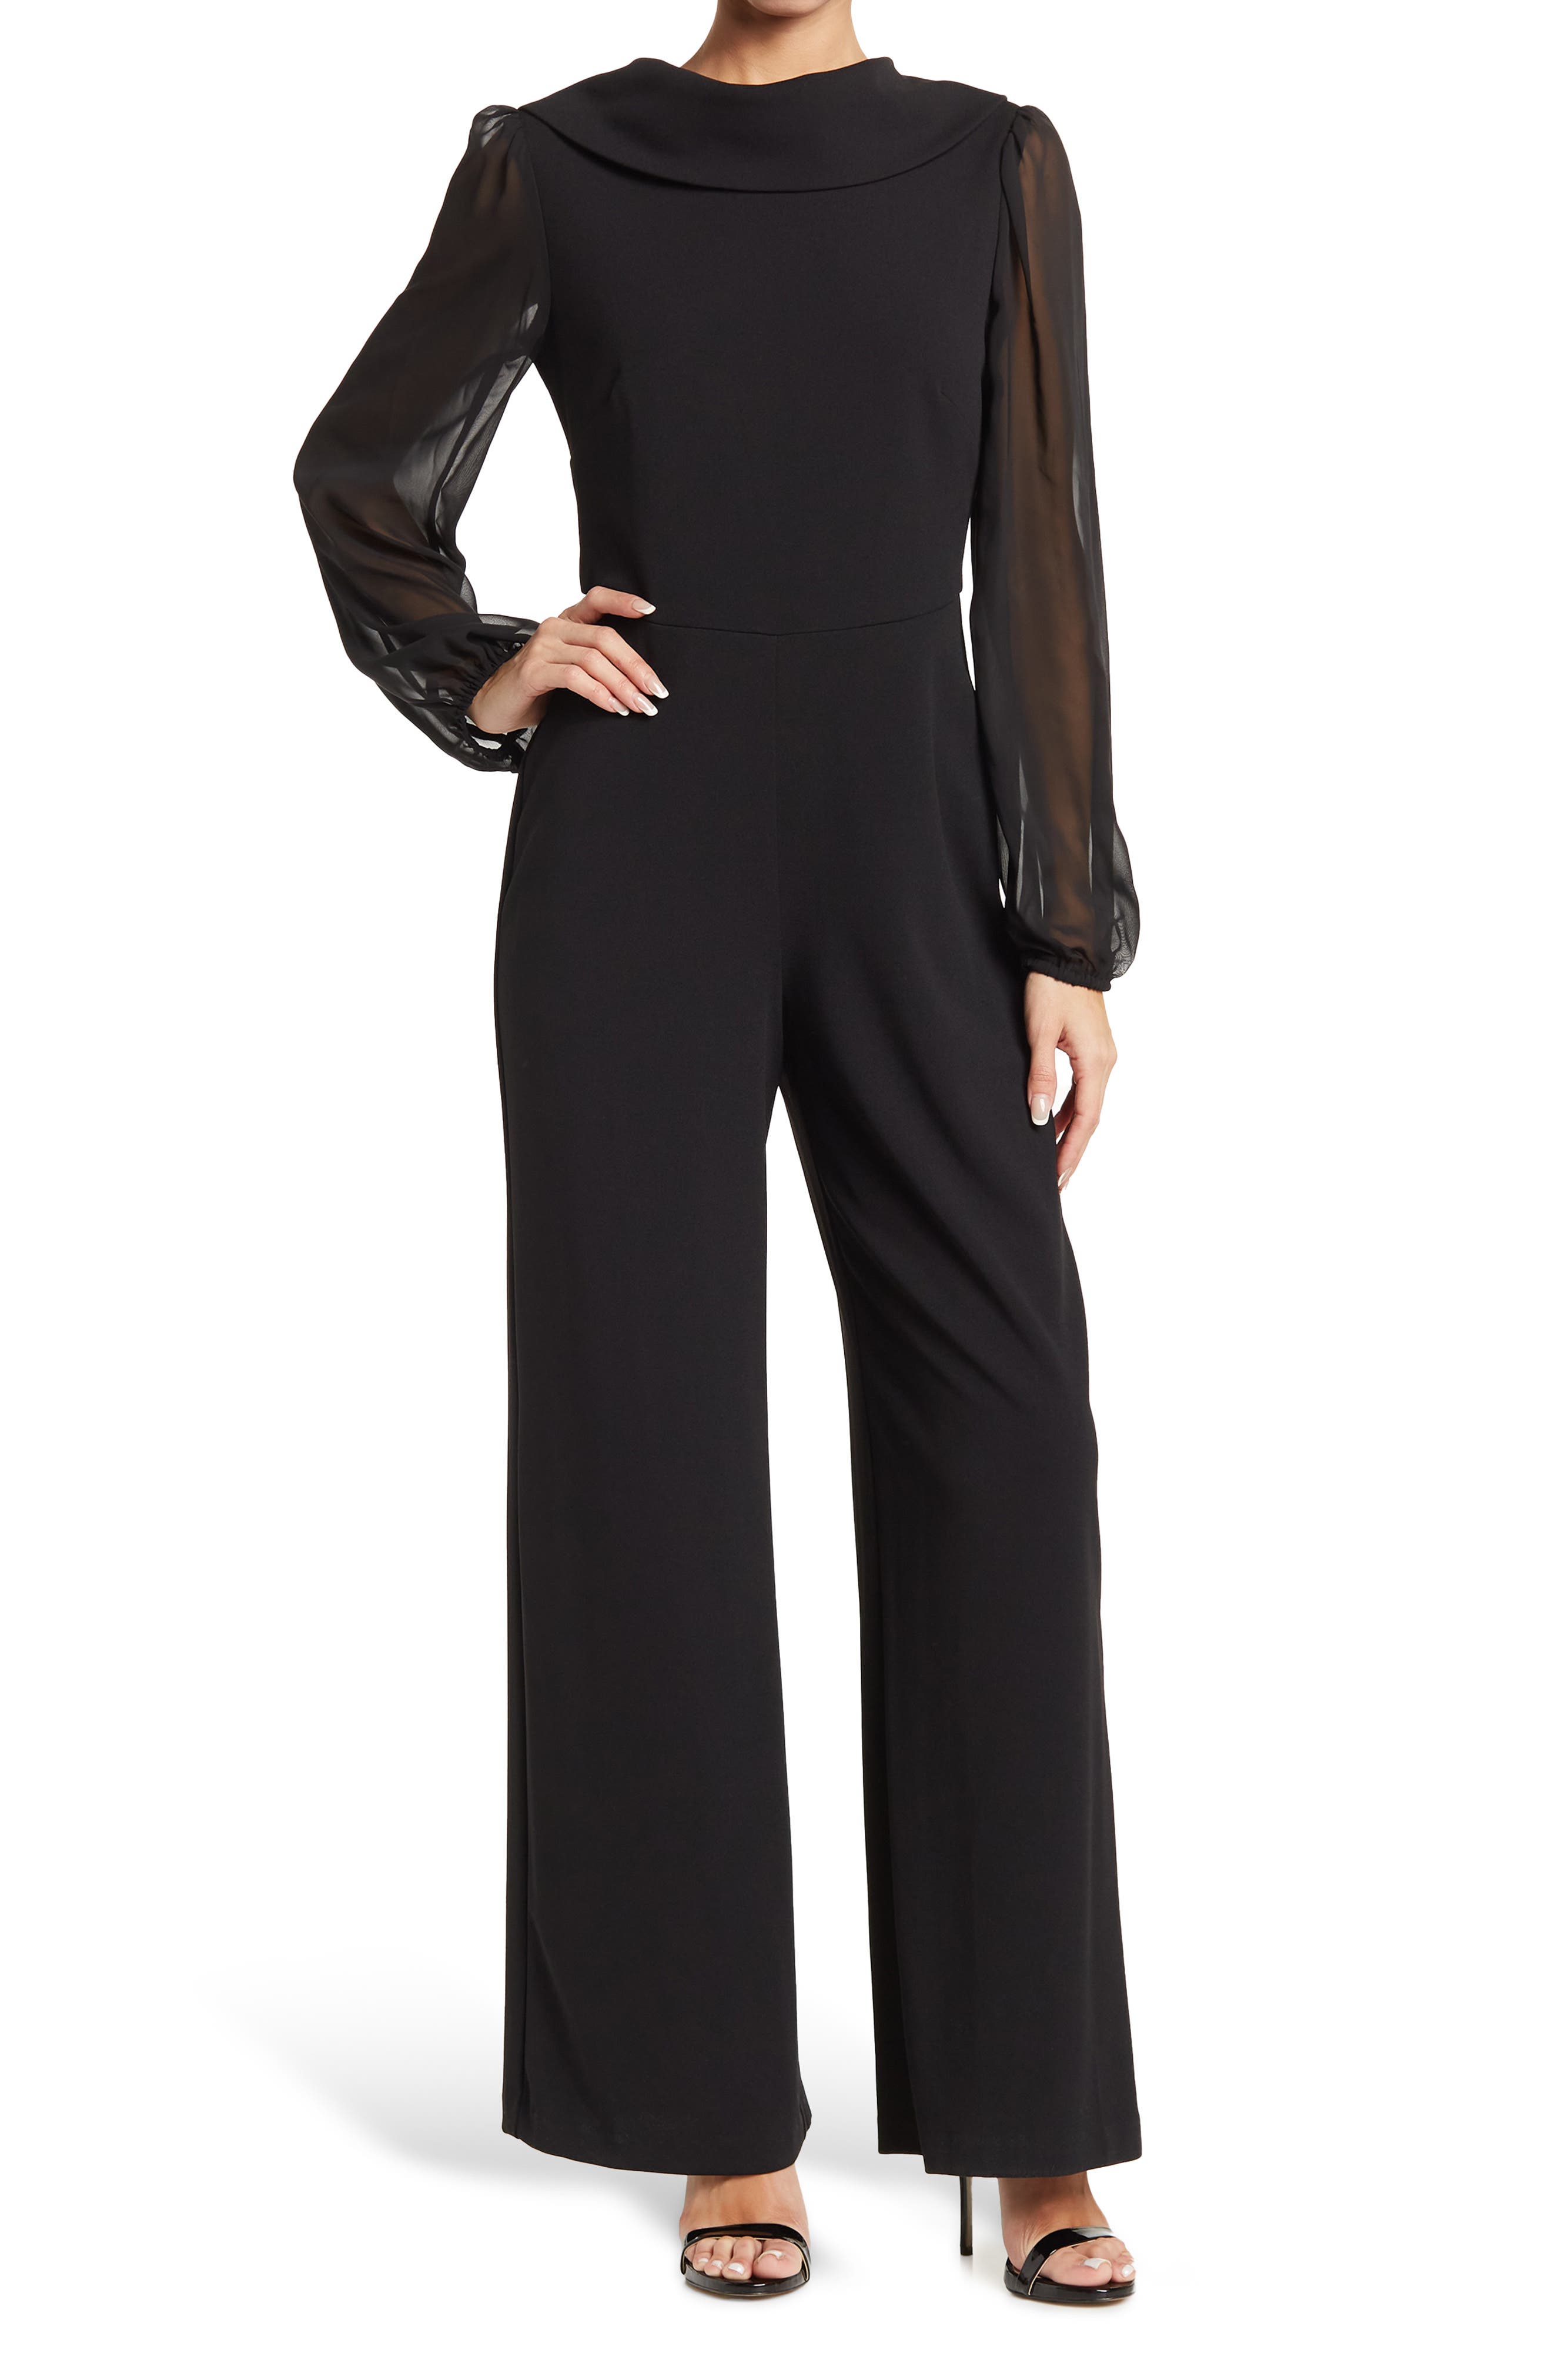 Mango Asymmetric Long Jumpsuit in Black Womens Clothing Jumpsuits and rompers Full-length jumpsuits and rompers 